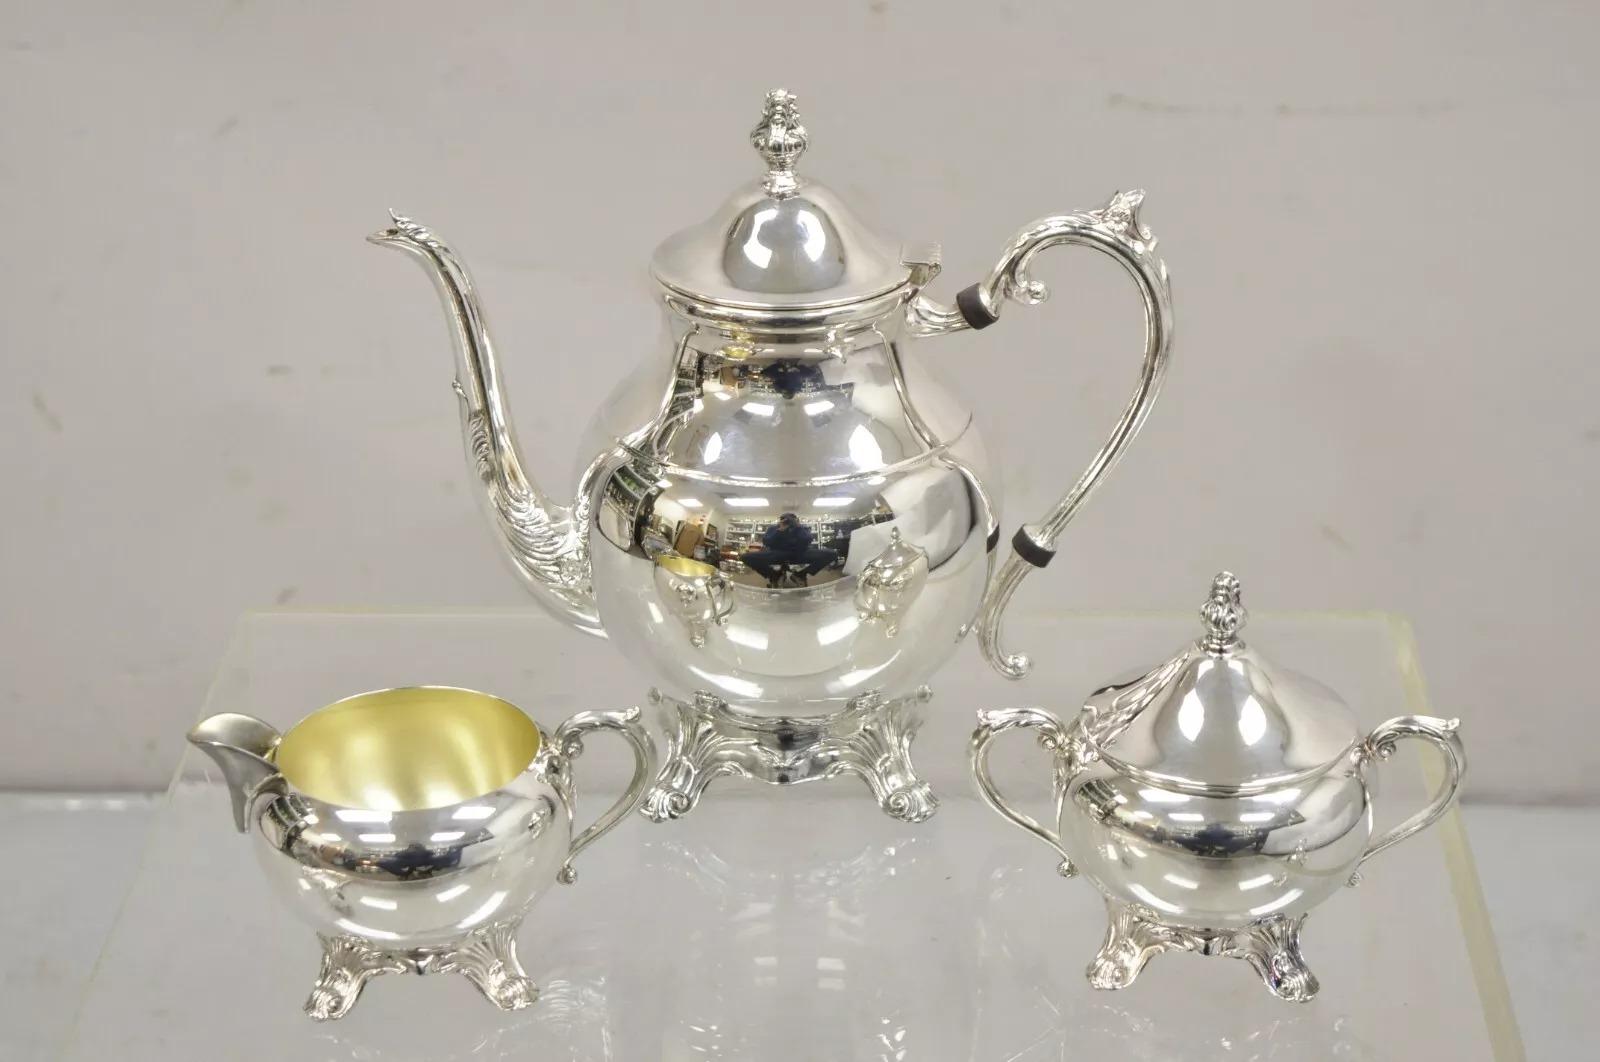 Vintage FB Rogers Victorian Silver Plated Tea Set with Tilting Pot - 6 Pc Set For Sale 1